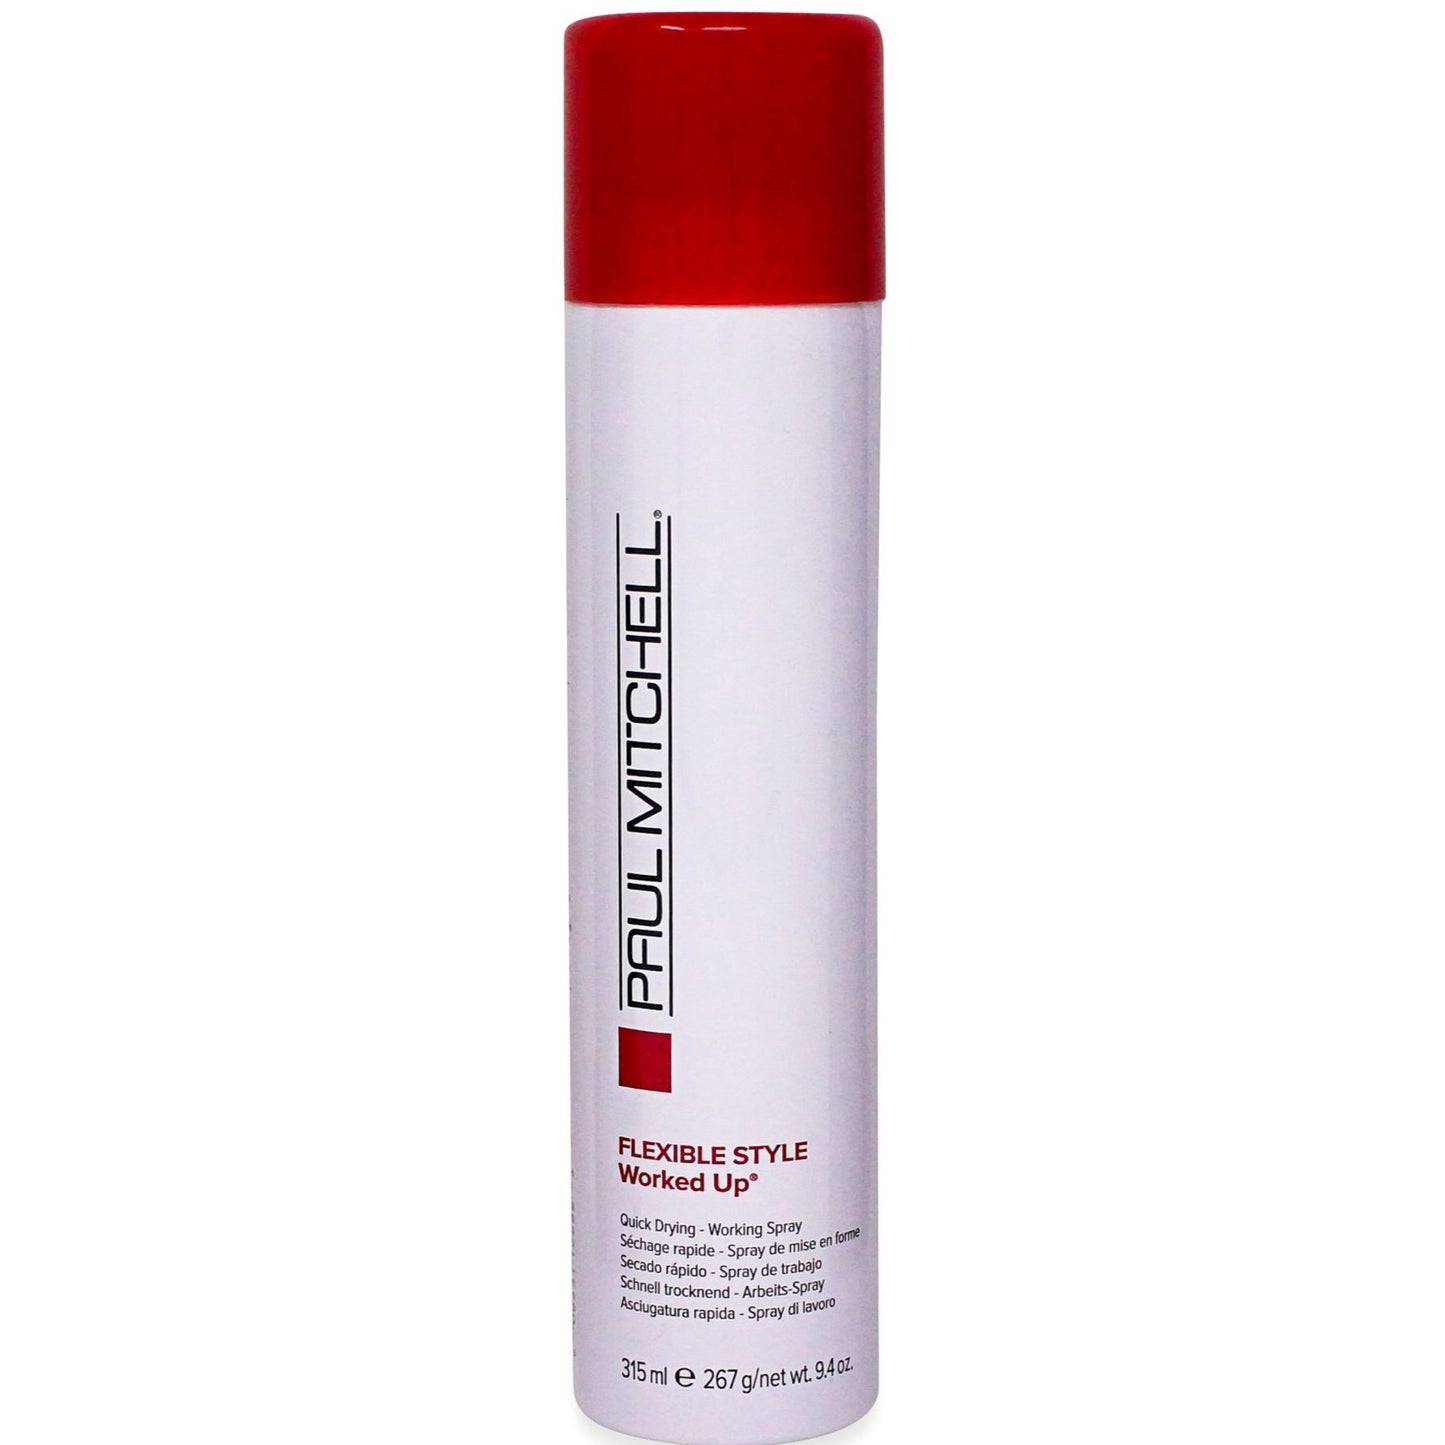 Paul Mitchell Flexible Style Worked Up Working Spray